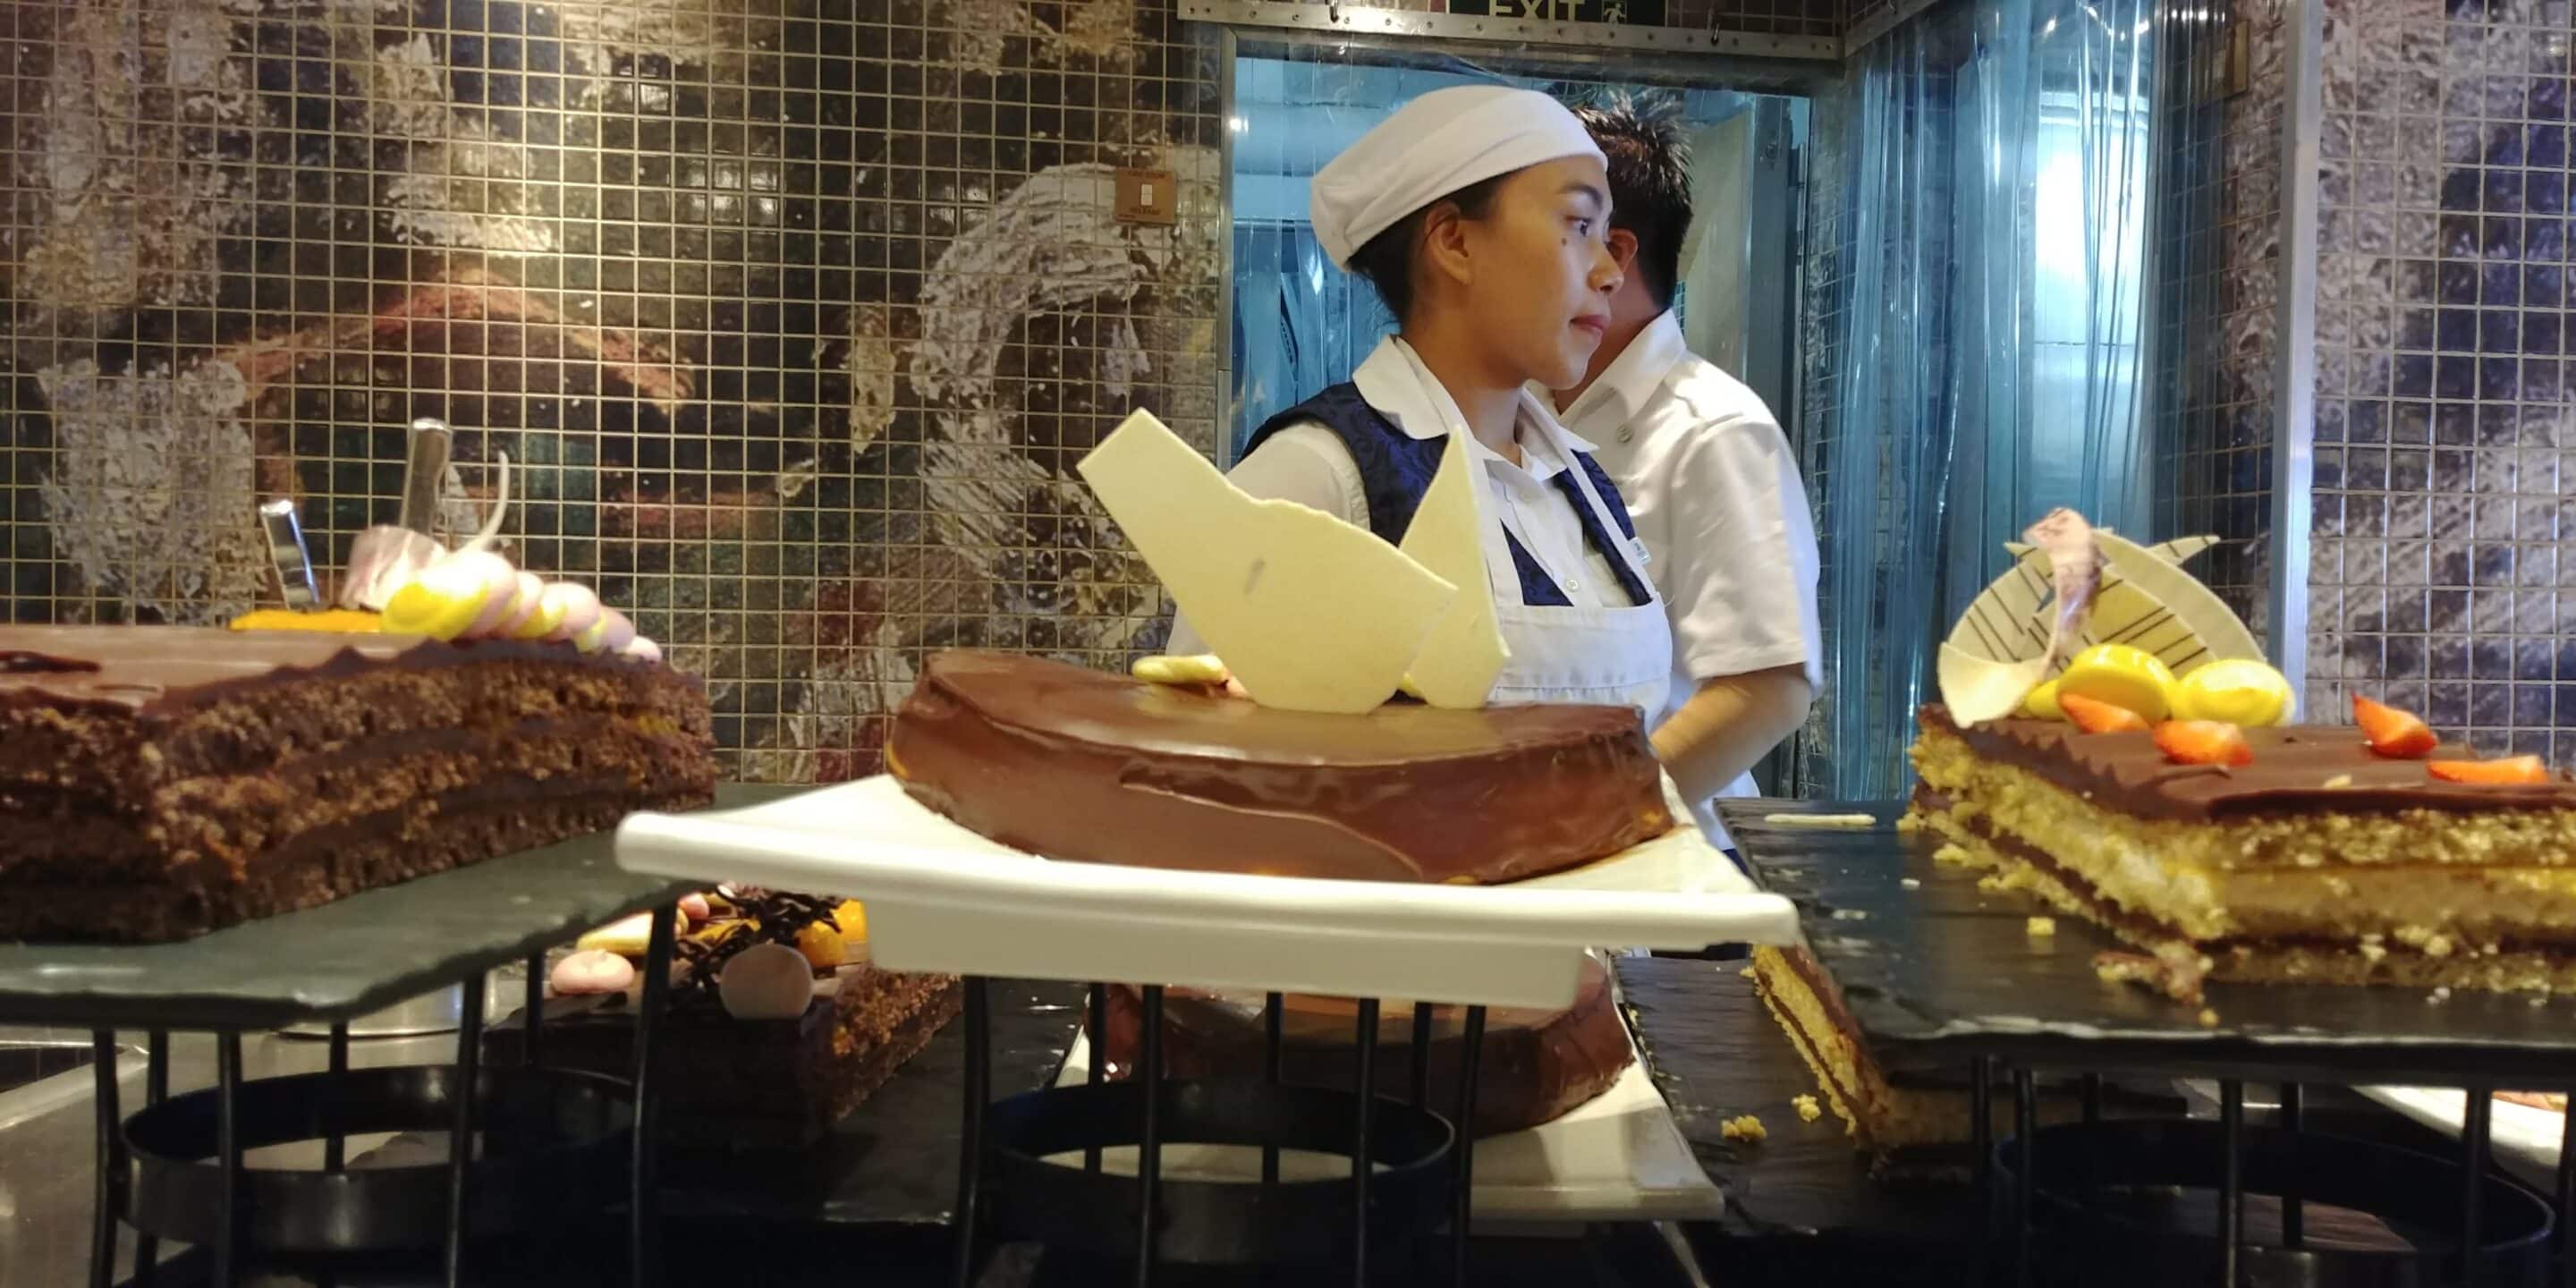 The Sweet spot on Carnival Ships where you will find lots of great cakes and cookies during lunch on the Lido Buffet